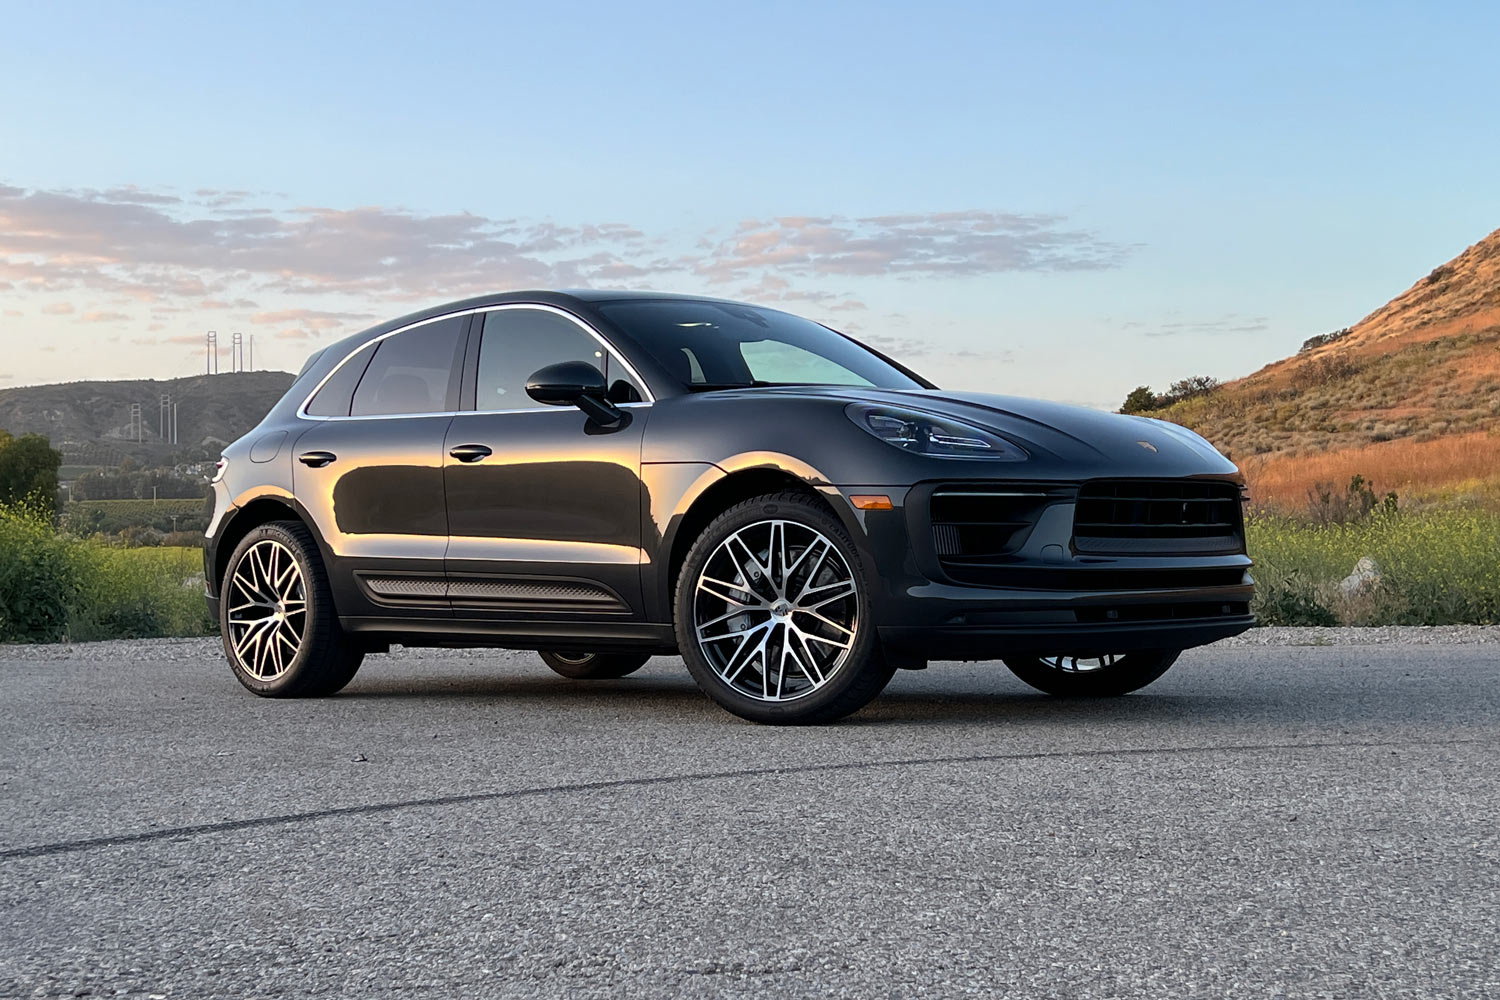 2022 Porsche Macan Reviews, Price, MPG and More | Capital One Auto Navigator